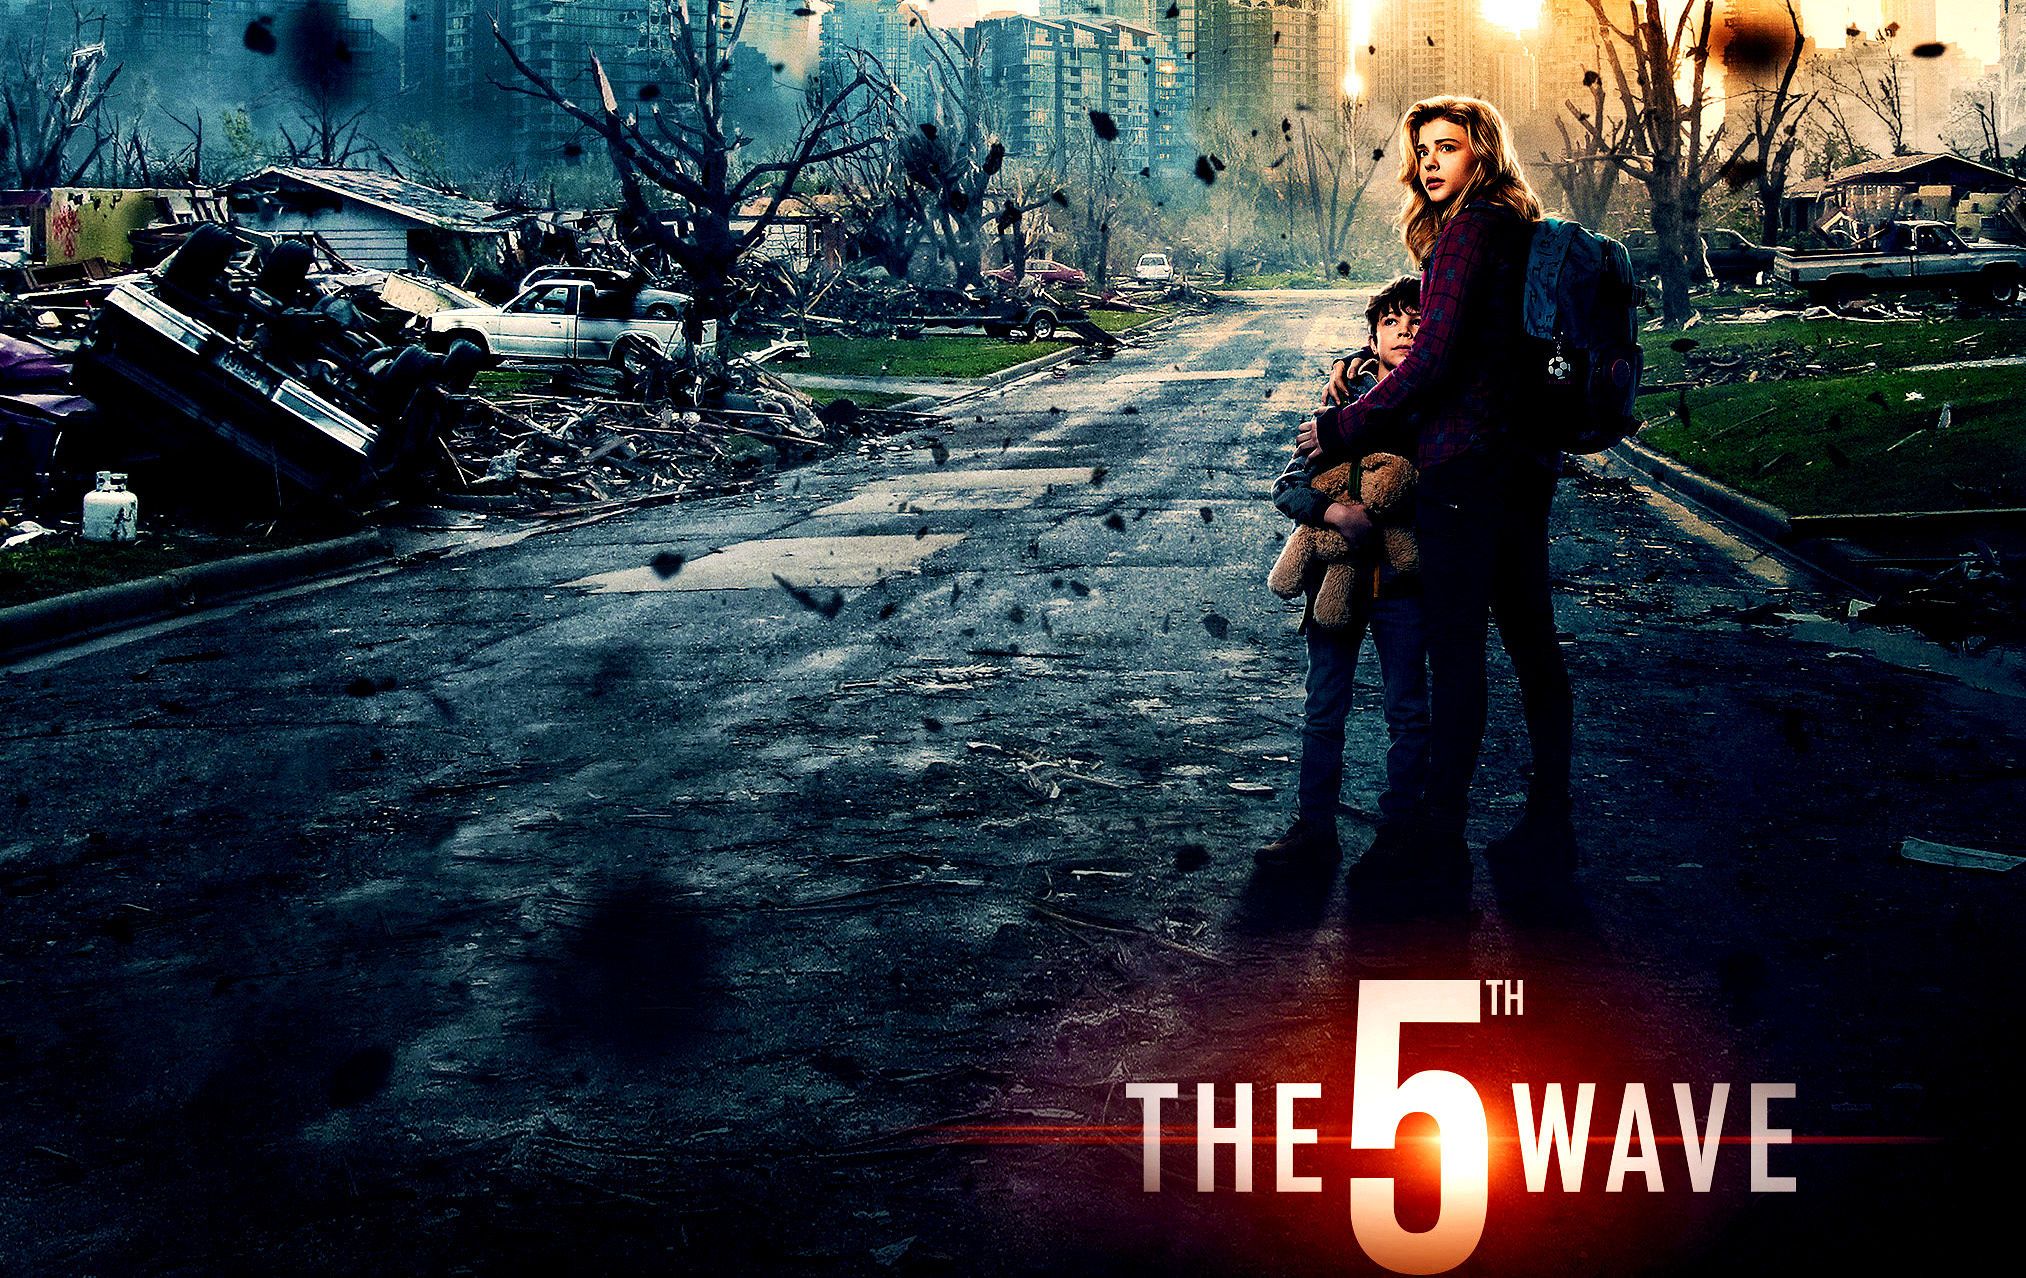 The 5th Wave wallpaper, Movie, HQ The 5th Wave pictureK Wallpaper 2019